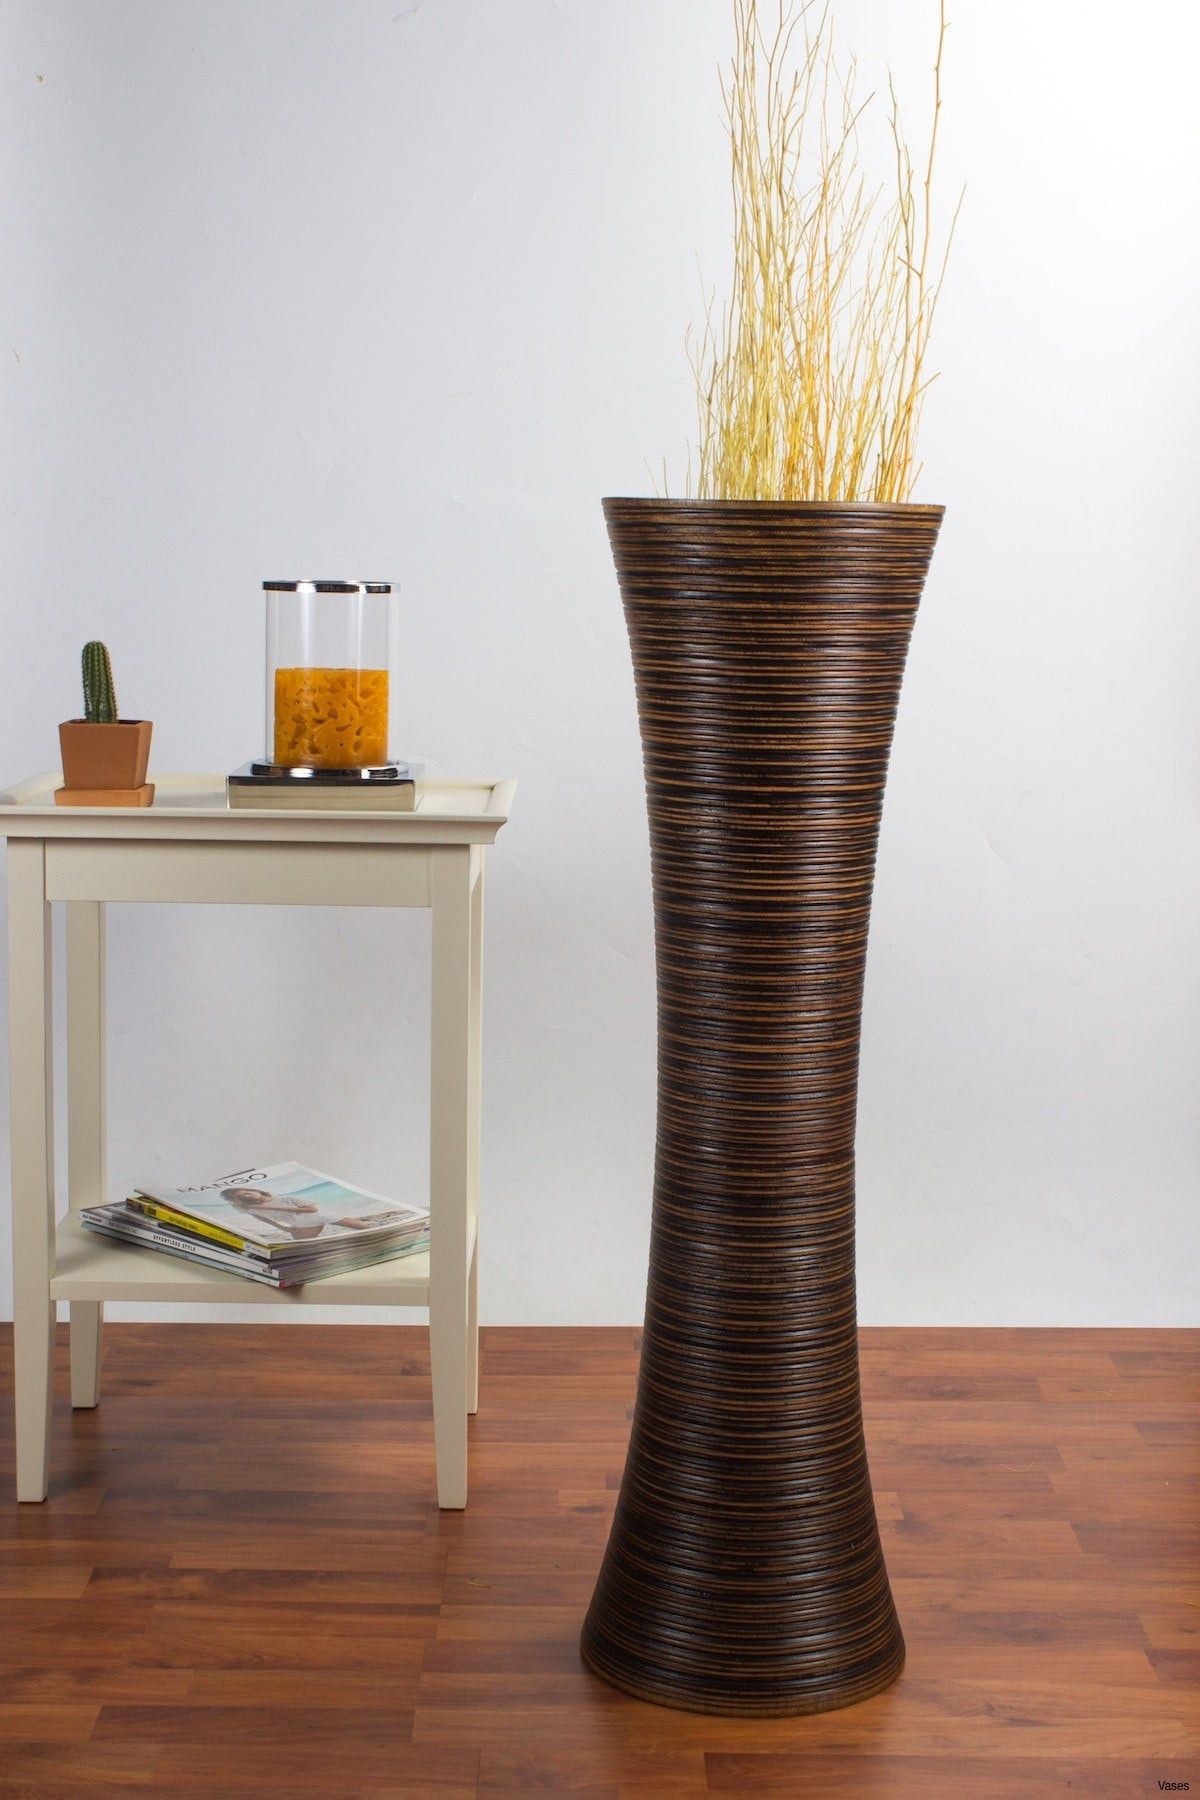 25 Ideal 36 Inch Glass Floor Vase 2024 free download 36 inch glass floor vase of tall decorative vases luxury decorative floor vases fresh d dkbrw in tall decorative vases luxury decorative floor vases fresh d dkbrw 5749 1h vases tall brown i